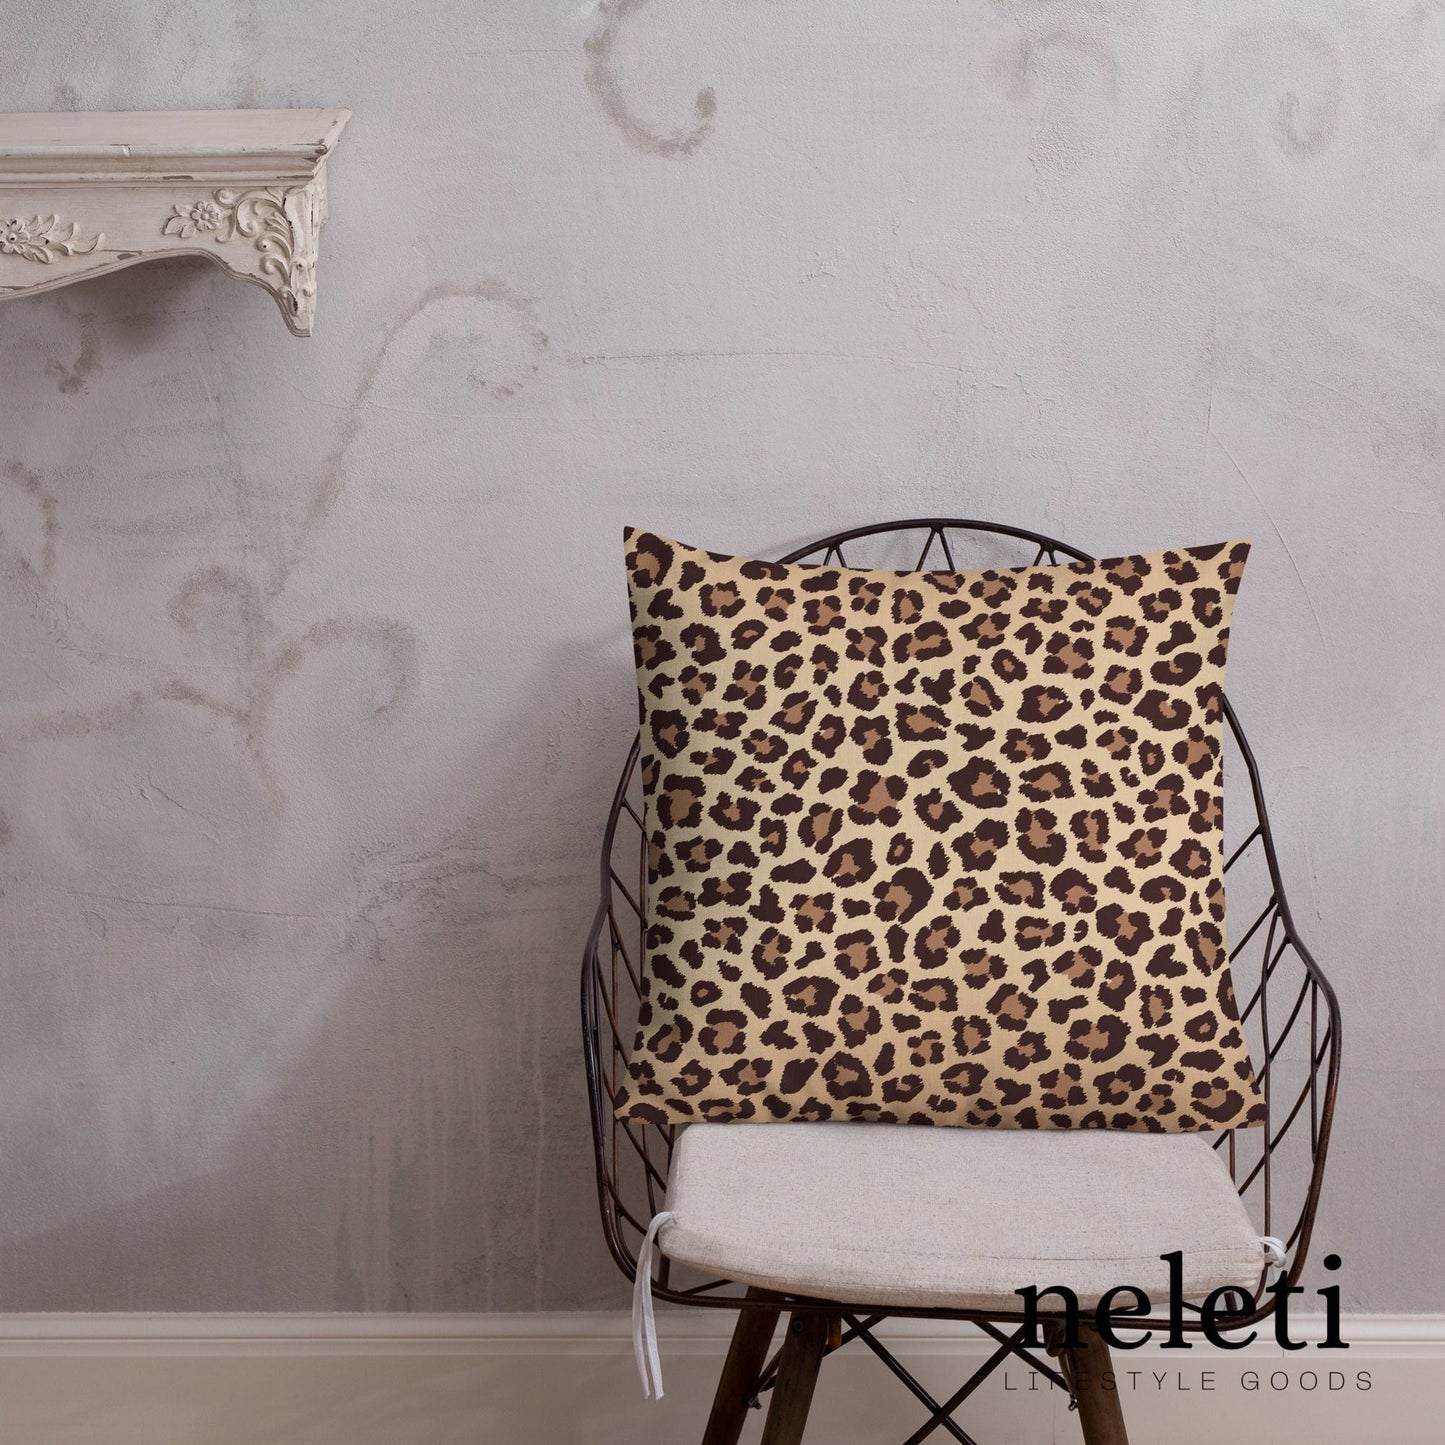 neleti.com-leopard-print-throw-pillow-in-size-22x22-inches_